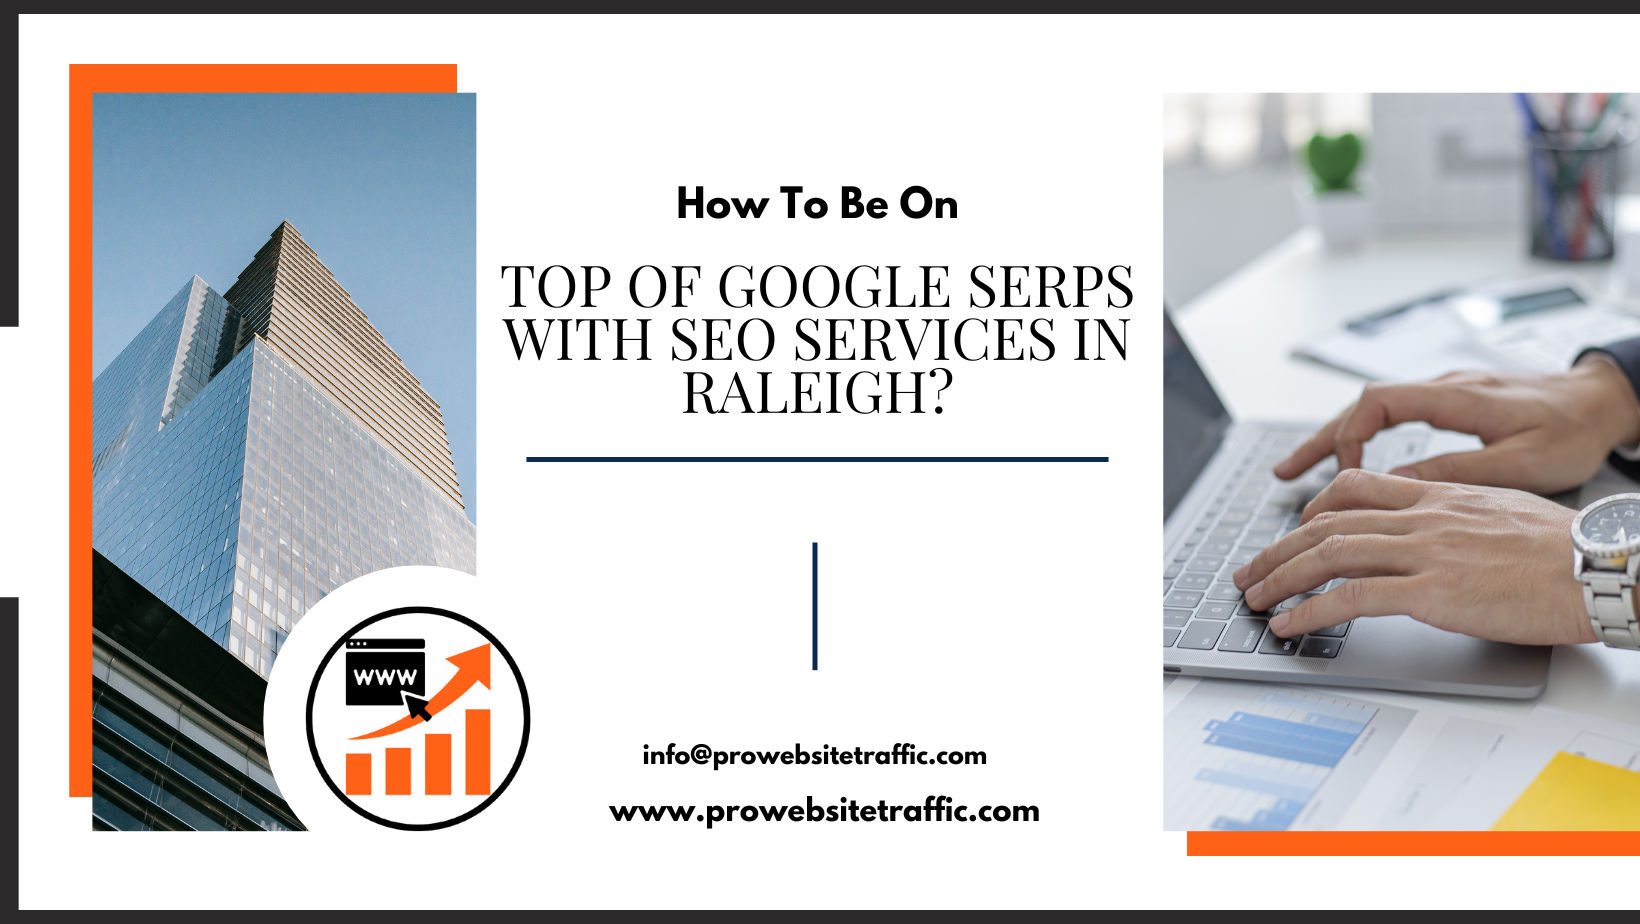 How To Be On Top Of Google SERPs With SEO Services In Raleigh, North Carolina?